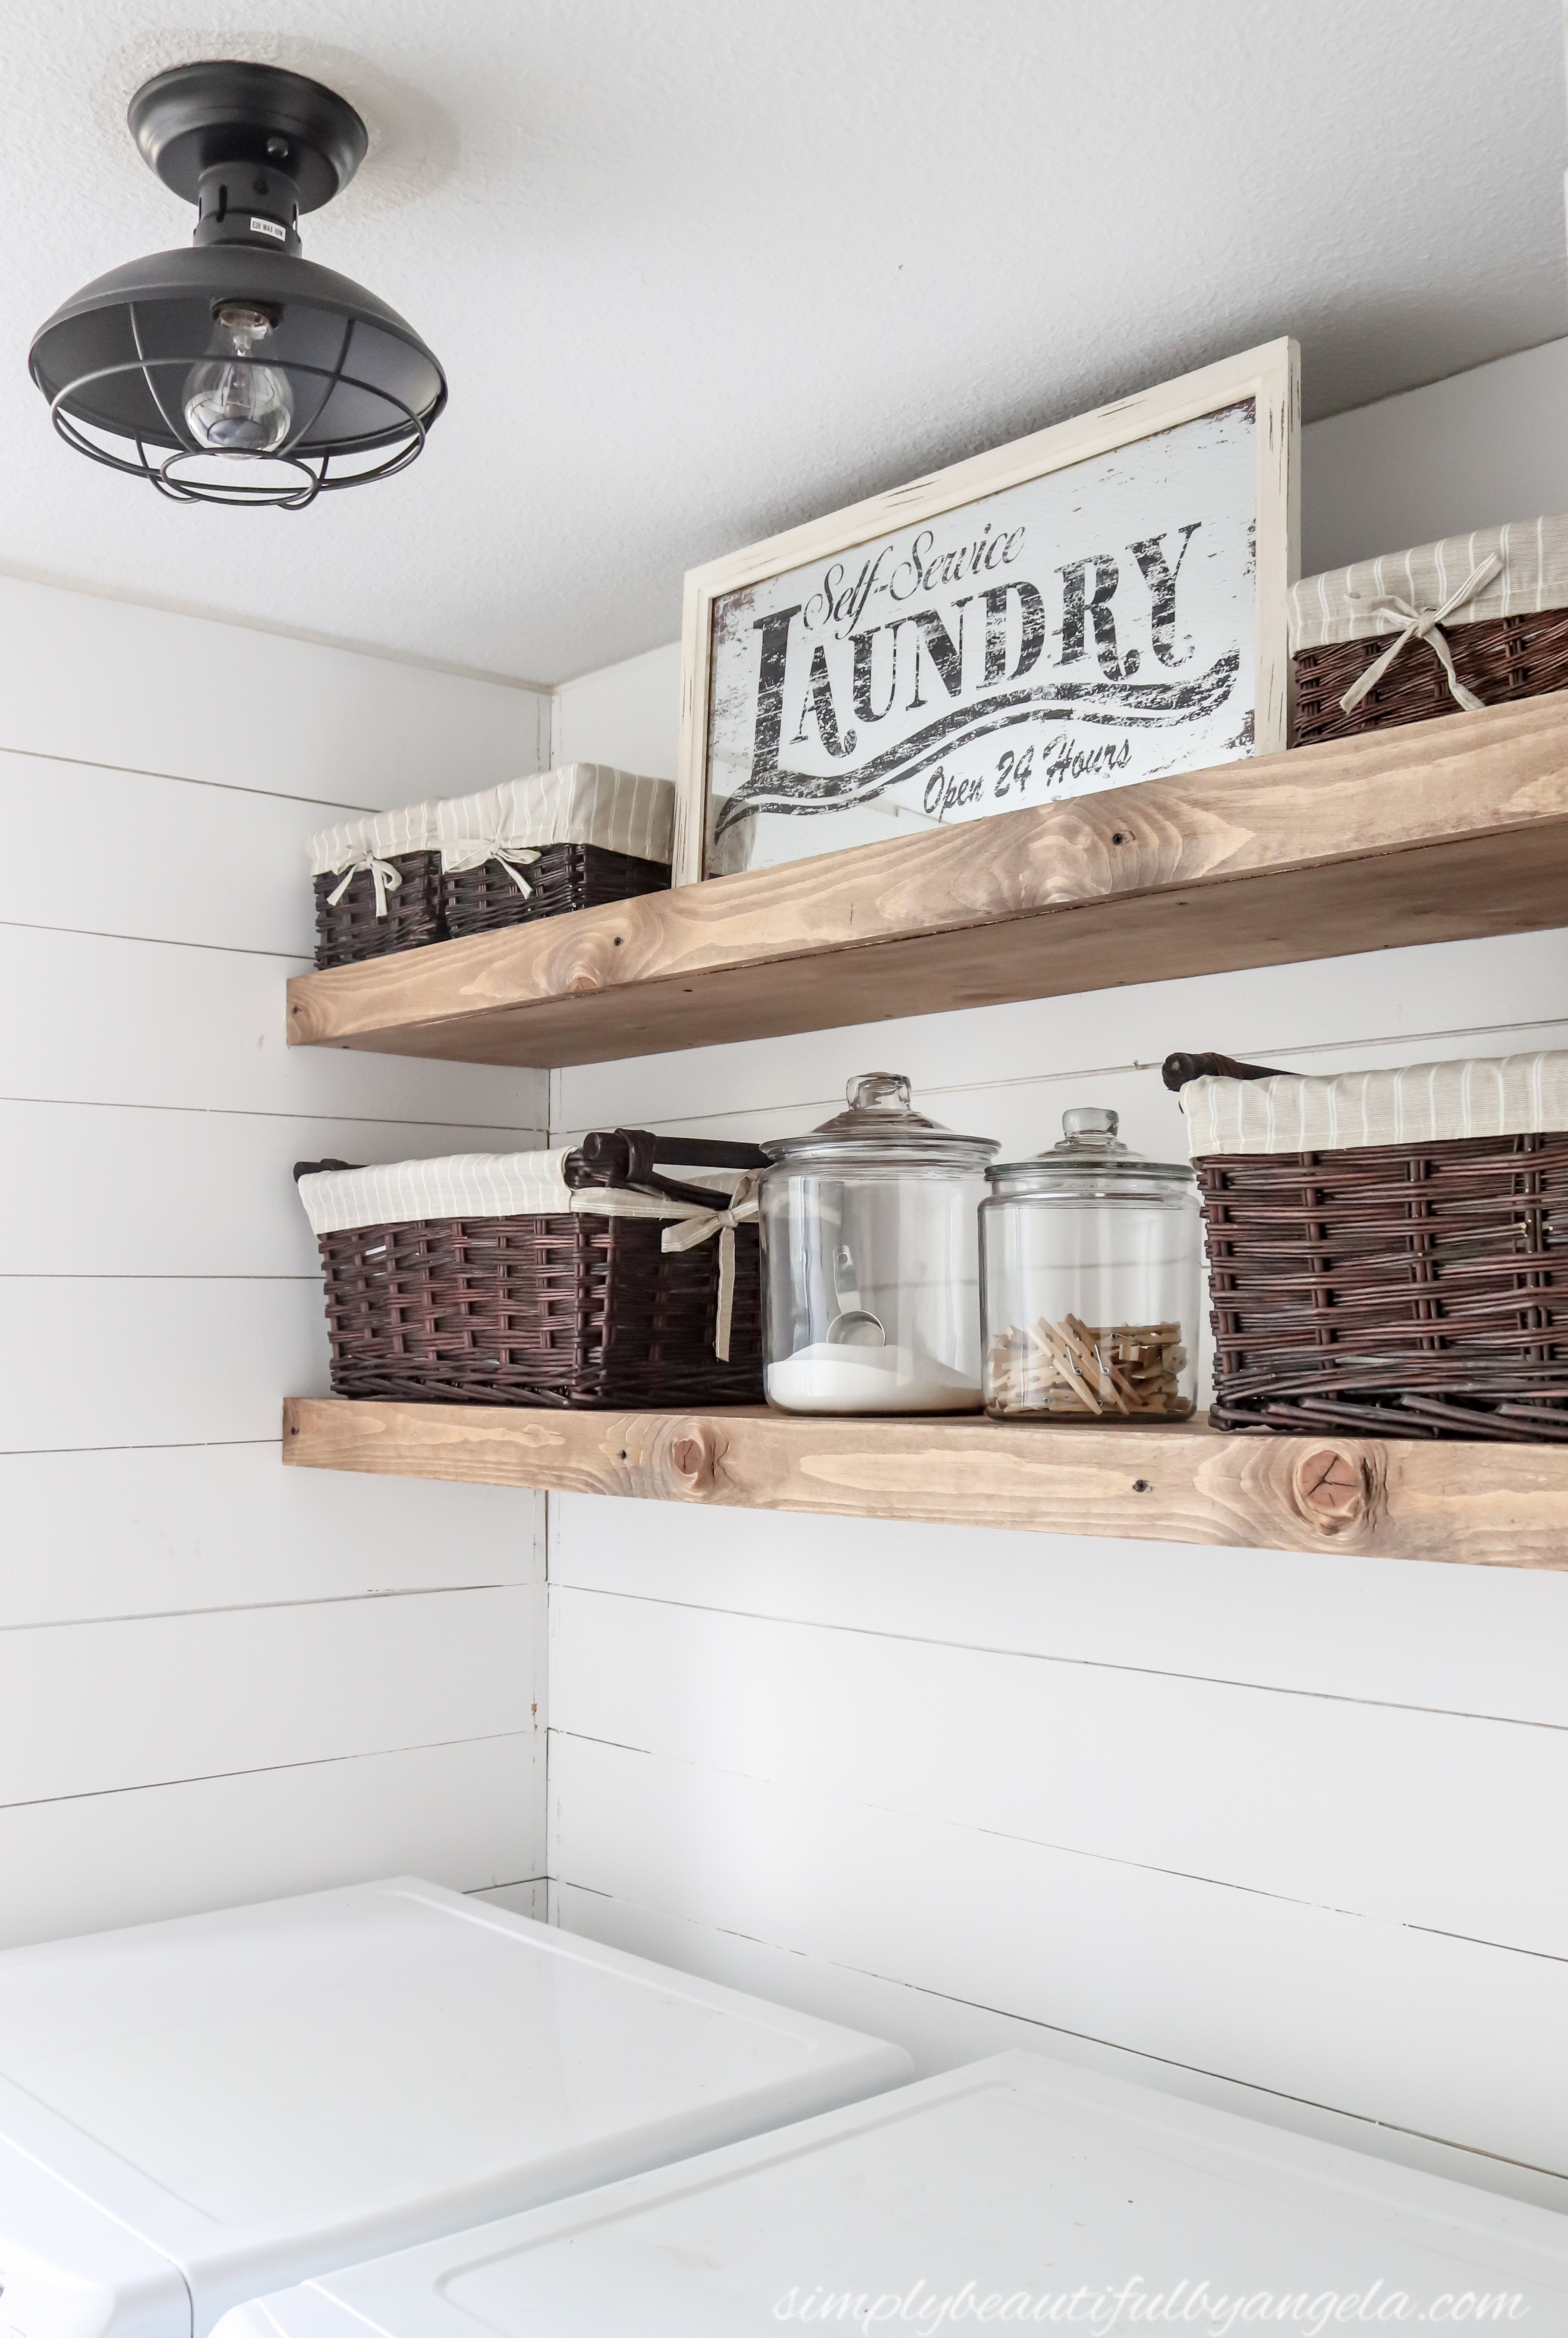 diy rustic farmhouse laundry room shelves simply beautiful angela floating quick reminder how empty this space felt before the went compared after display dishes open shelf ideas